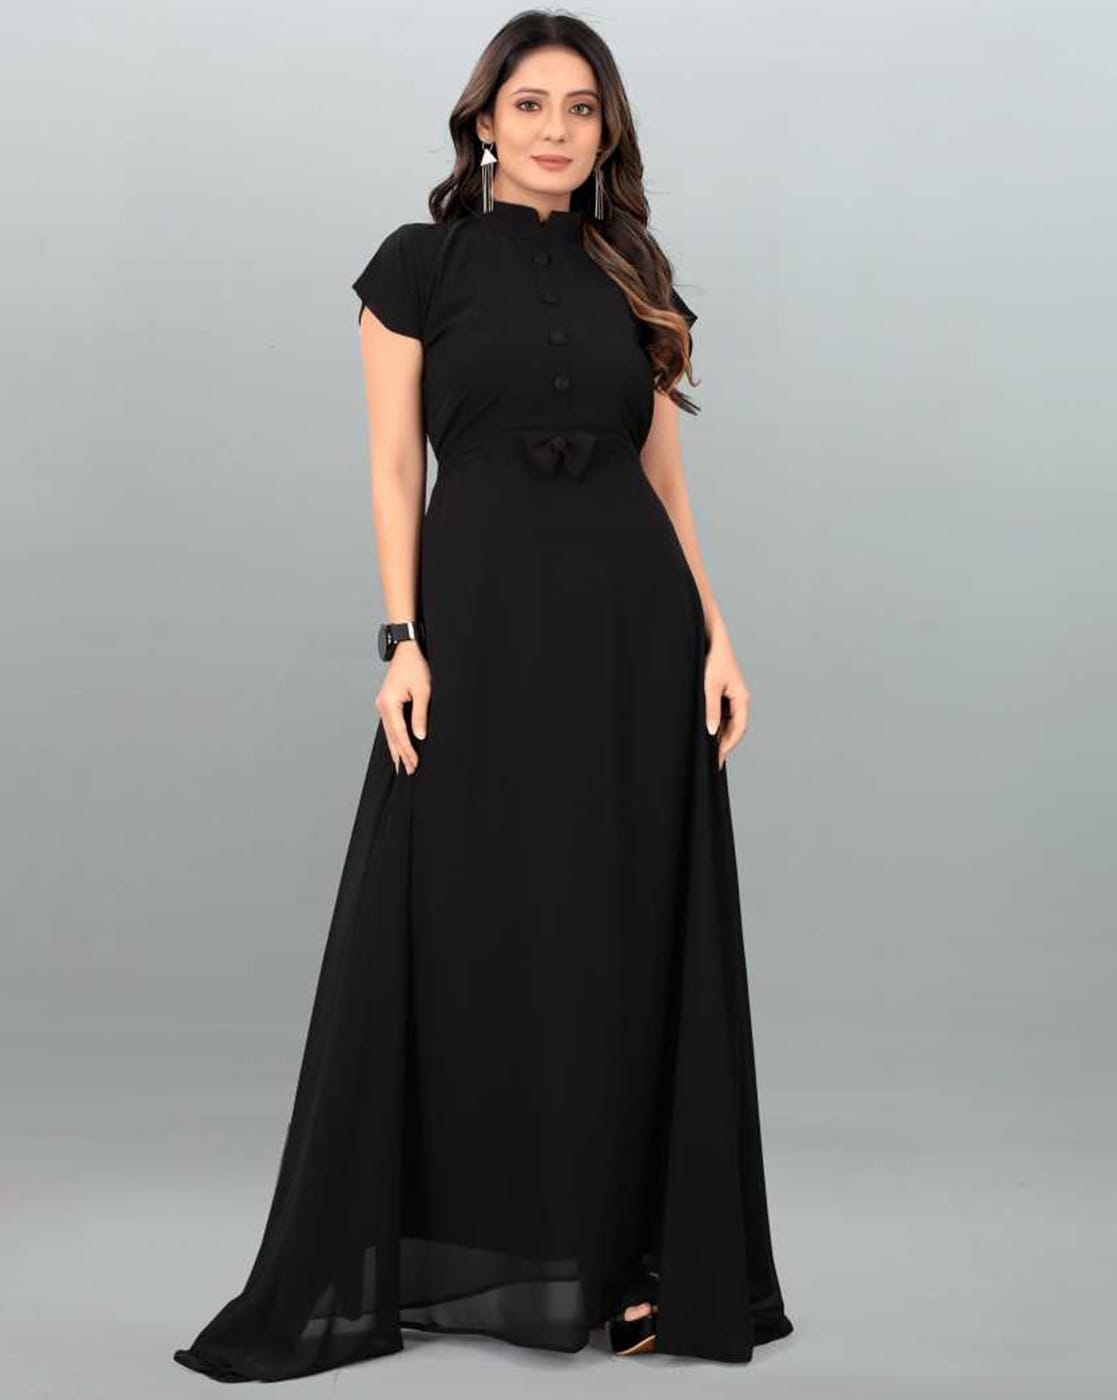 Top more than 235 black gown for chubby best